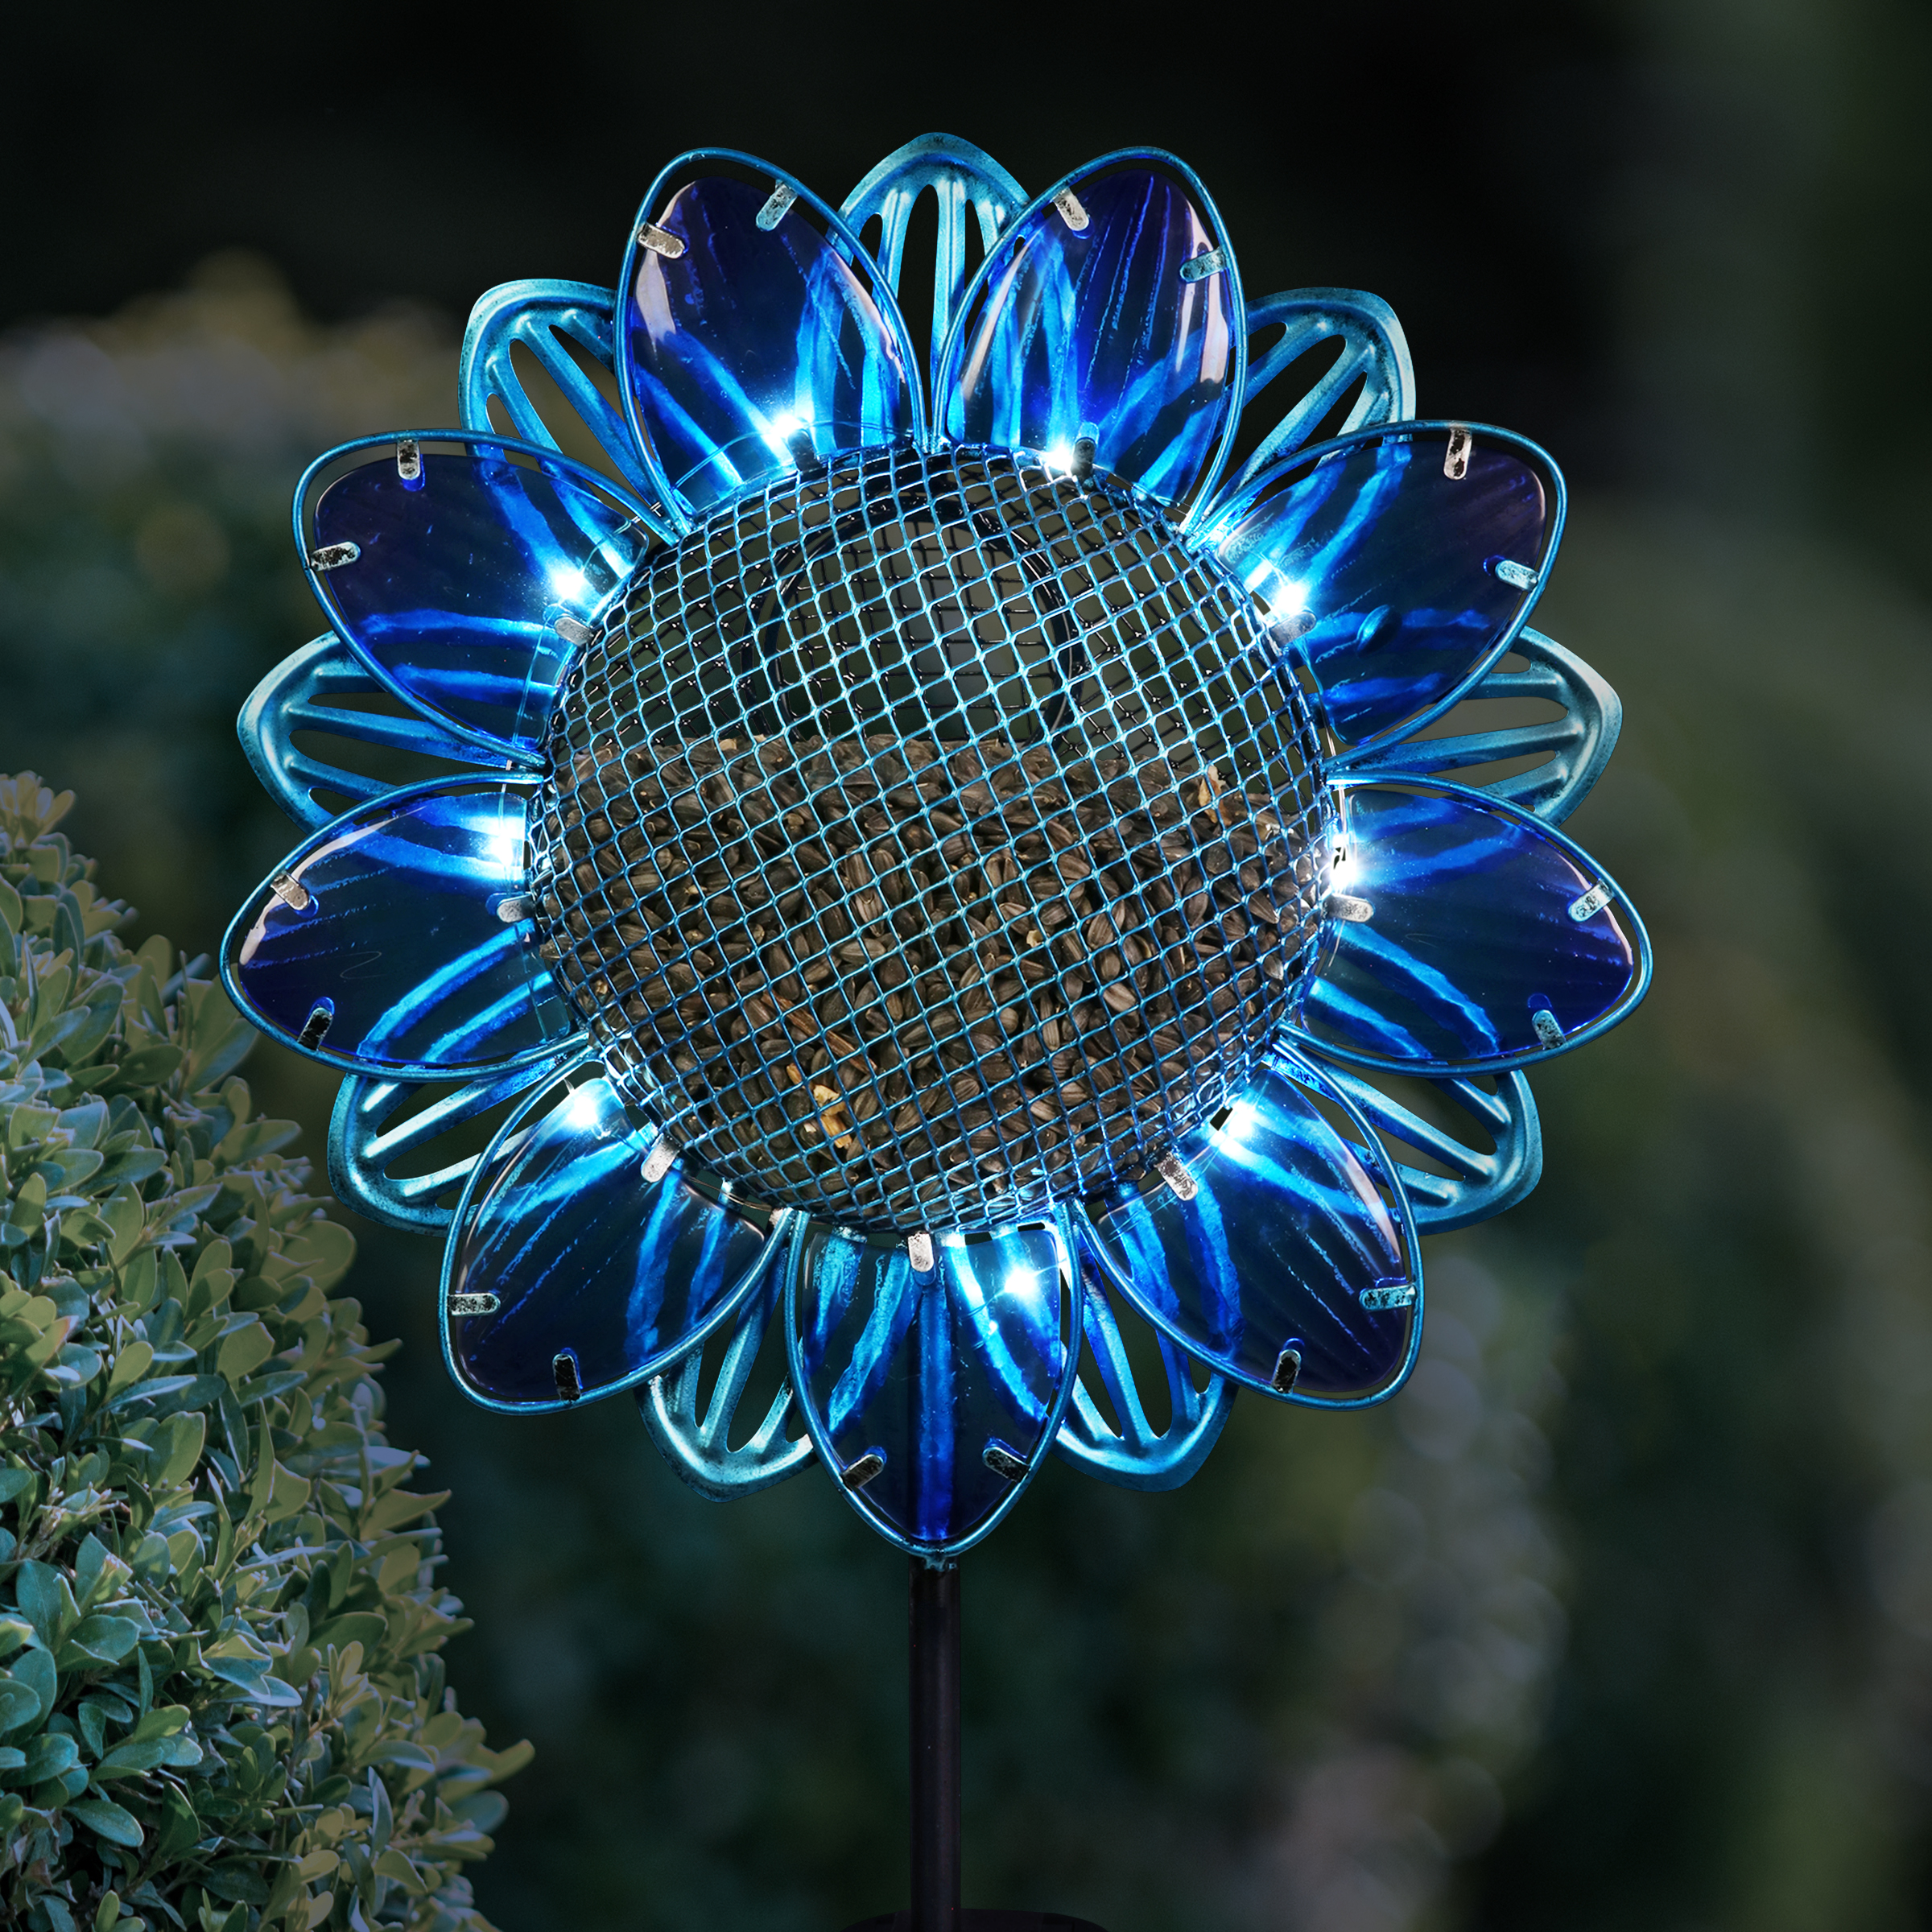 Exhart  Blue Sunflower Metal and Glass Bird Seed Feeder Solar Powered Garden Stake, 11 by 36 inches - image 3 of 7